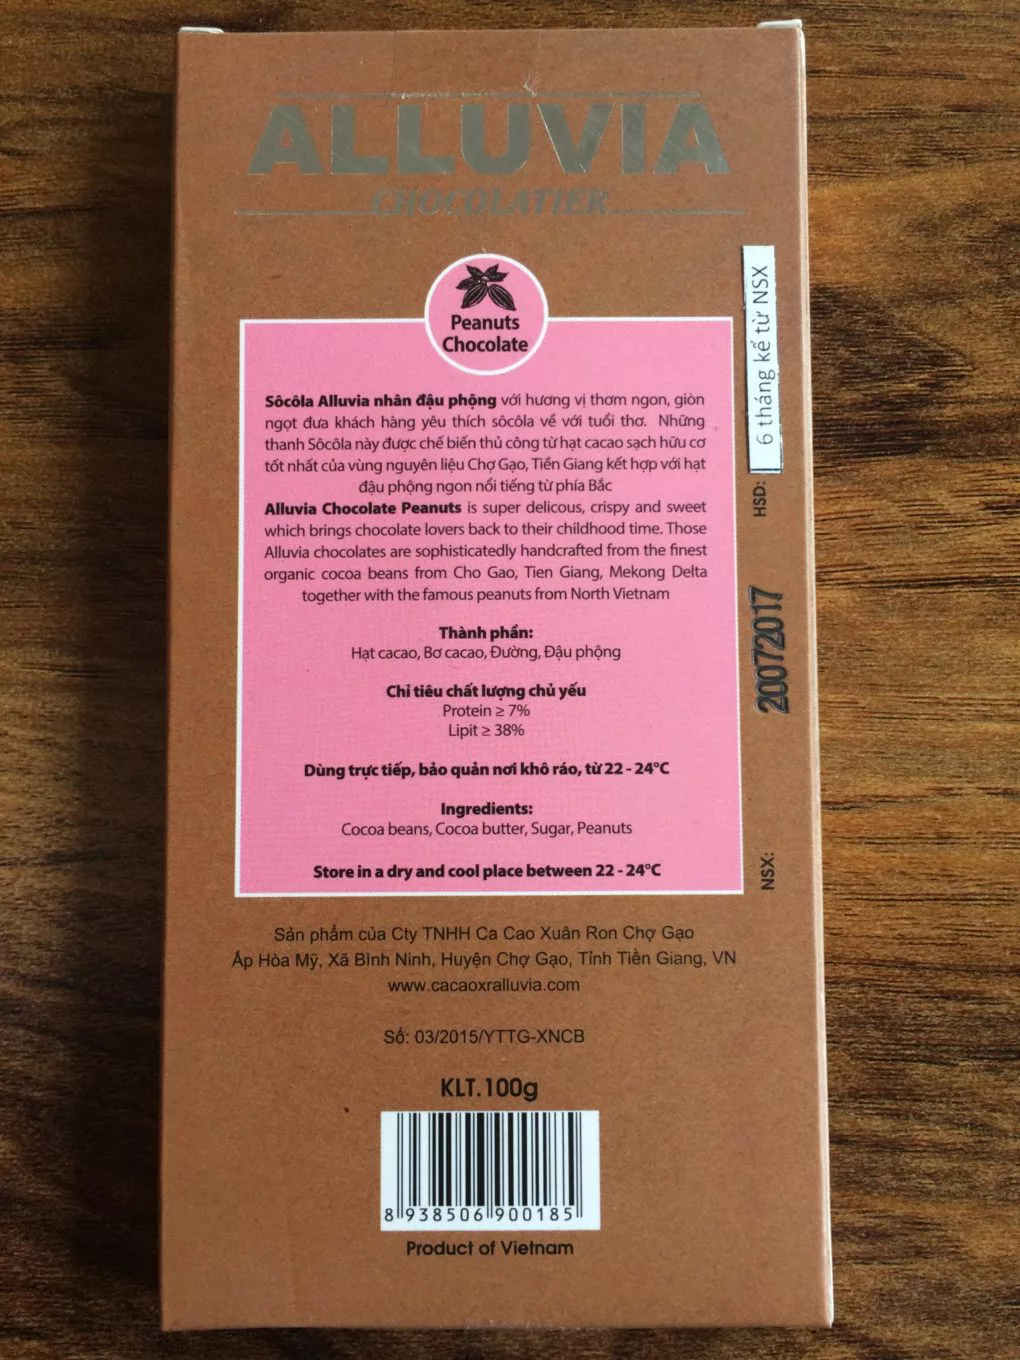 packaging of alluvia chocolate bar with peanuts